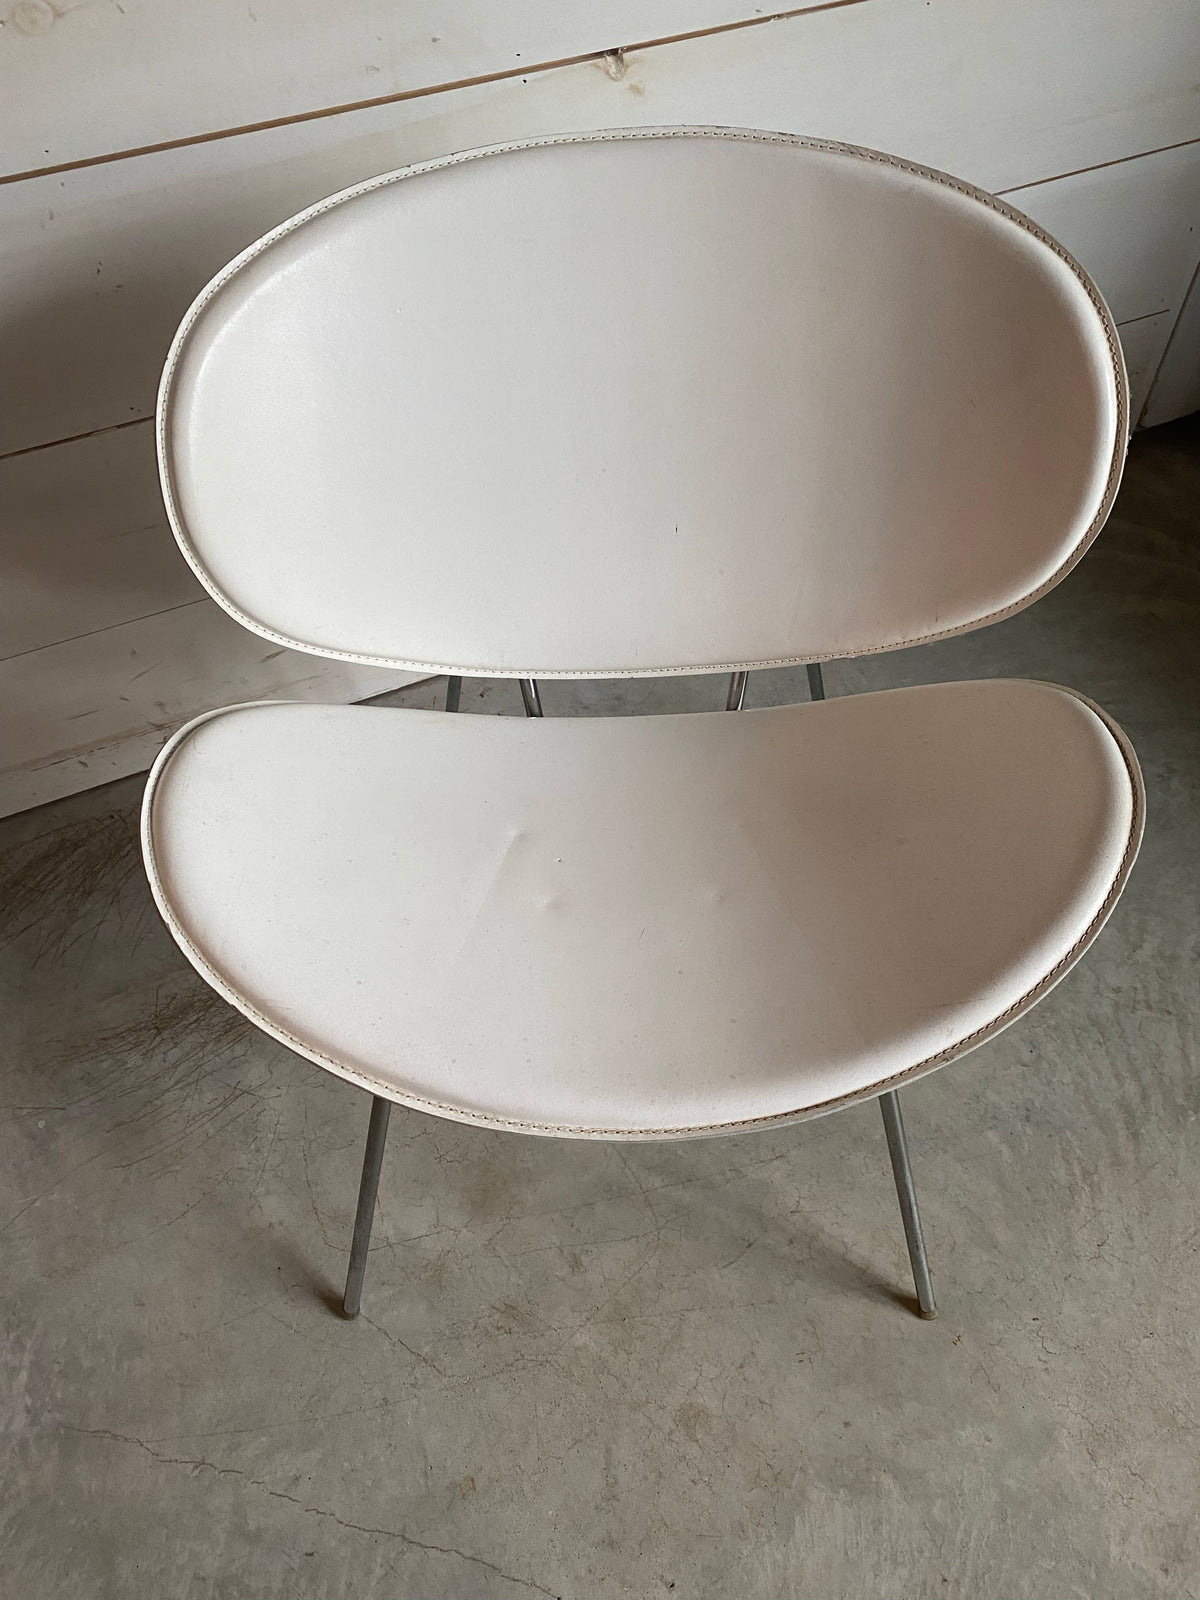 Vintage Leather Clamshell Chair - White